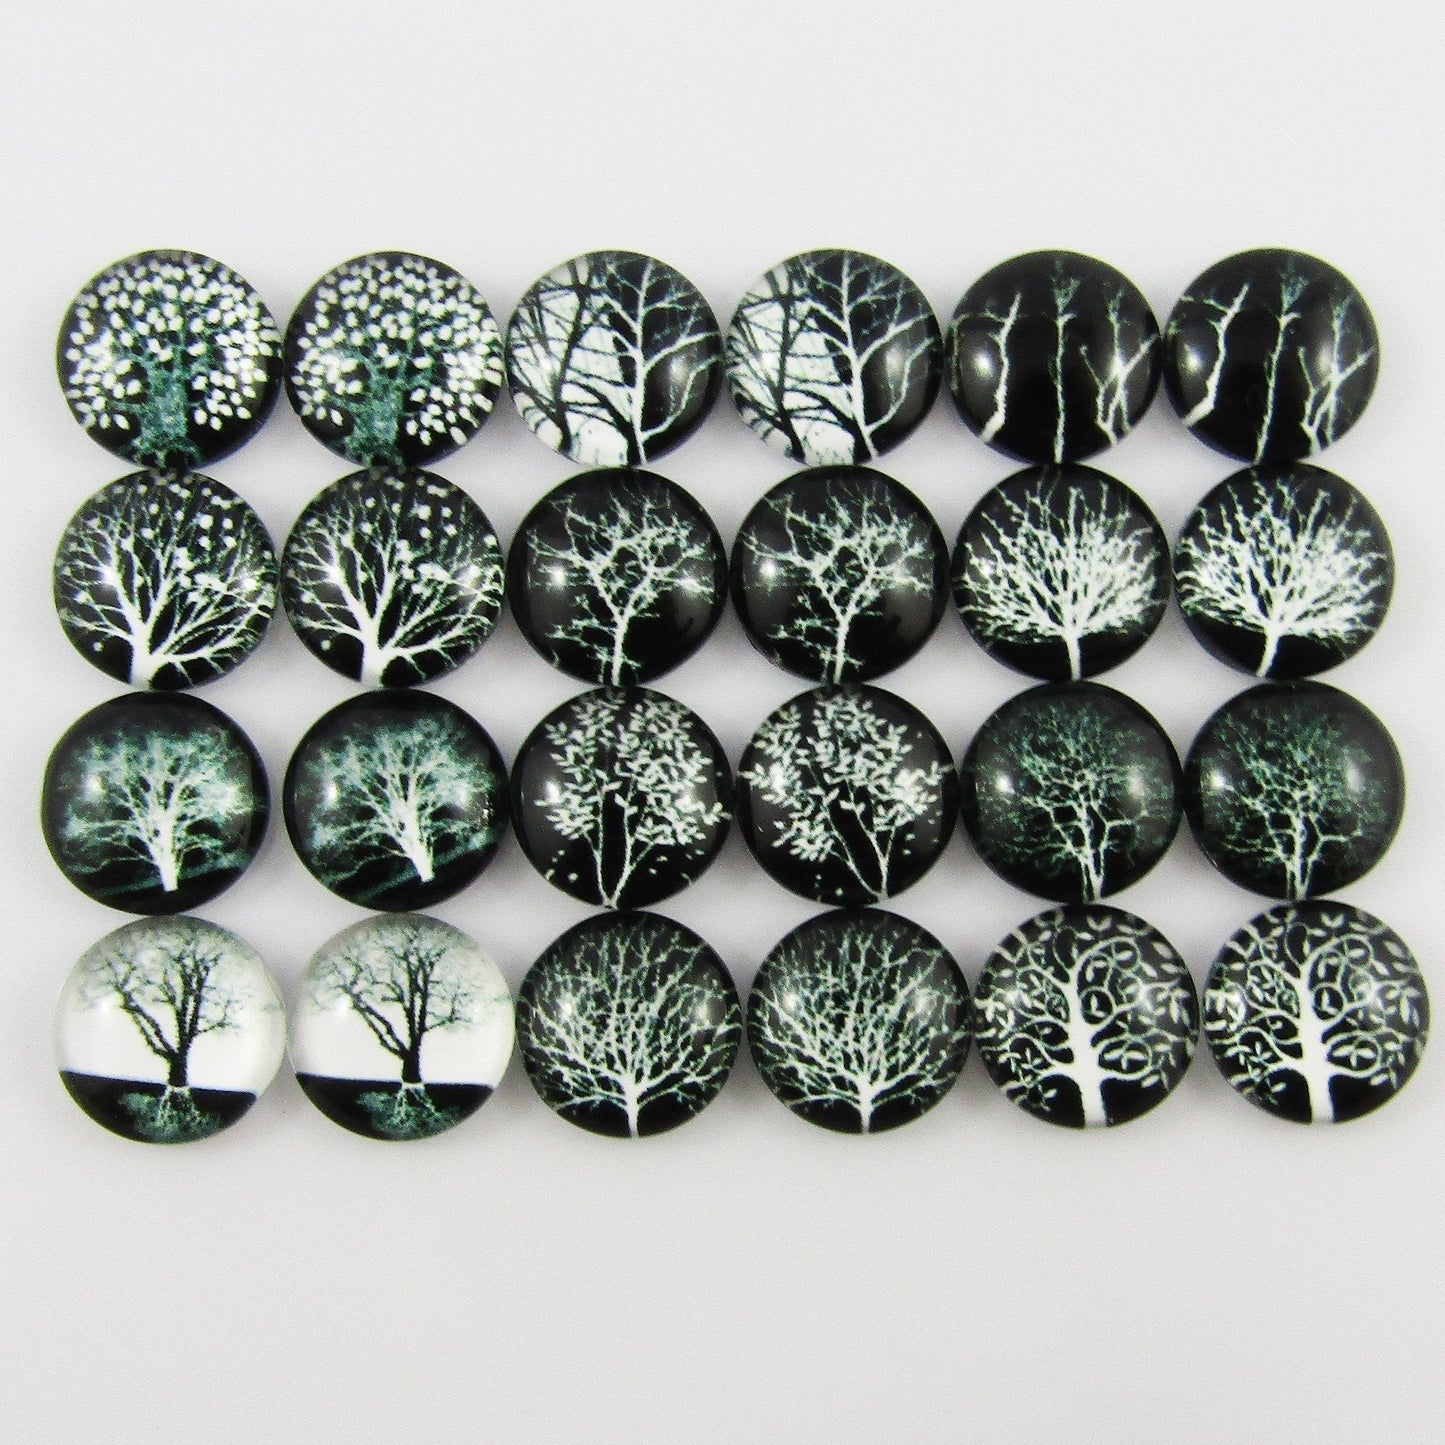 Glass Dome Black & White Trees Cabochon 12mm Pick 10 or 20 pieces random pairs